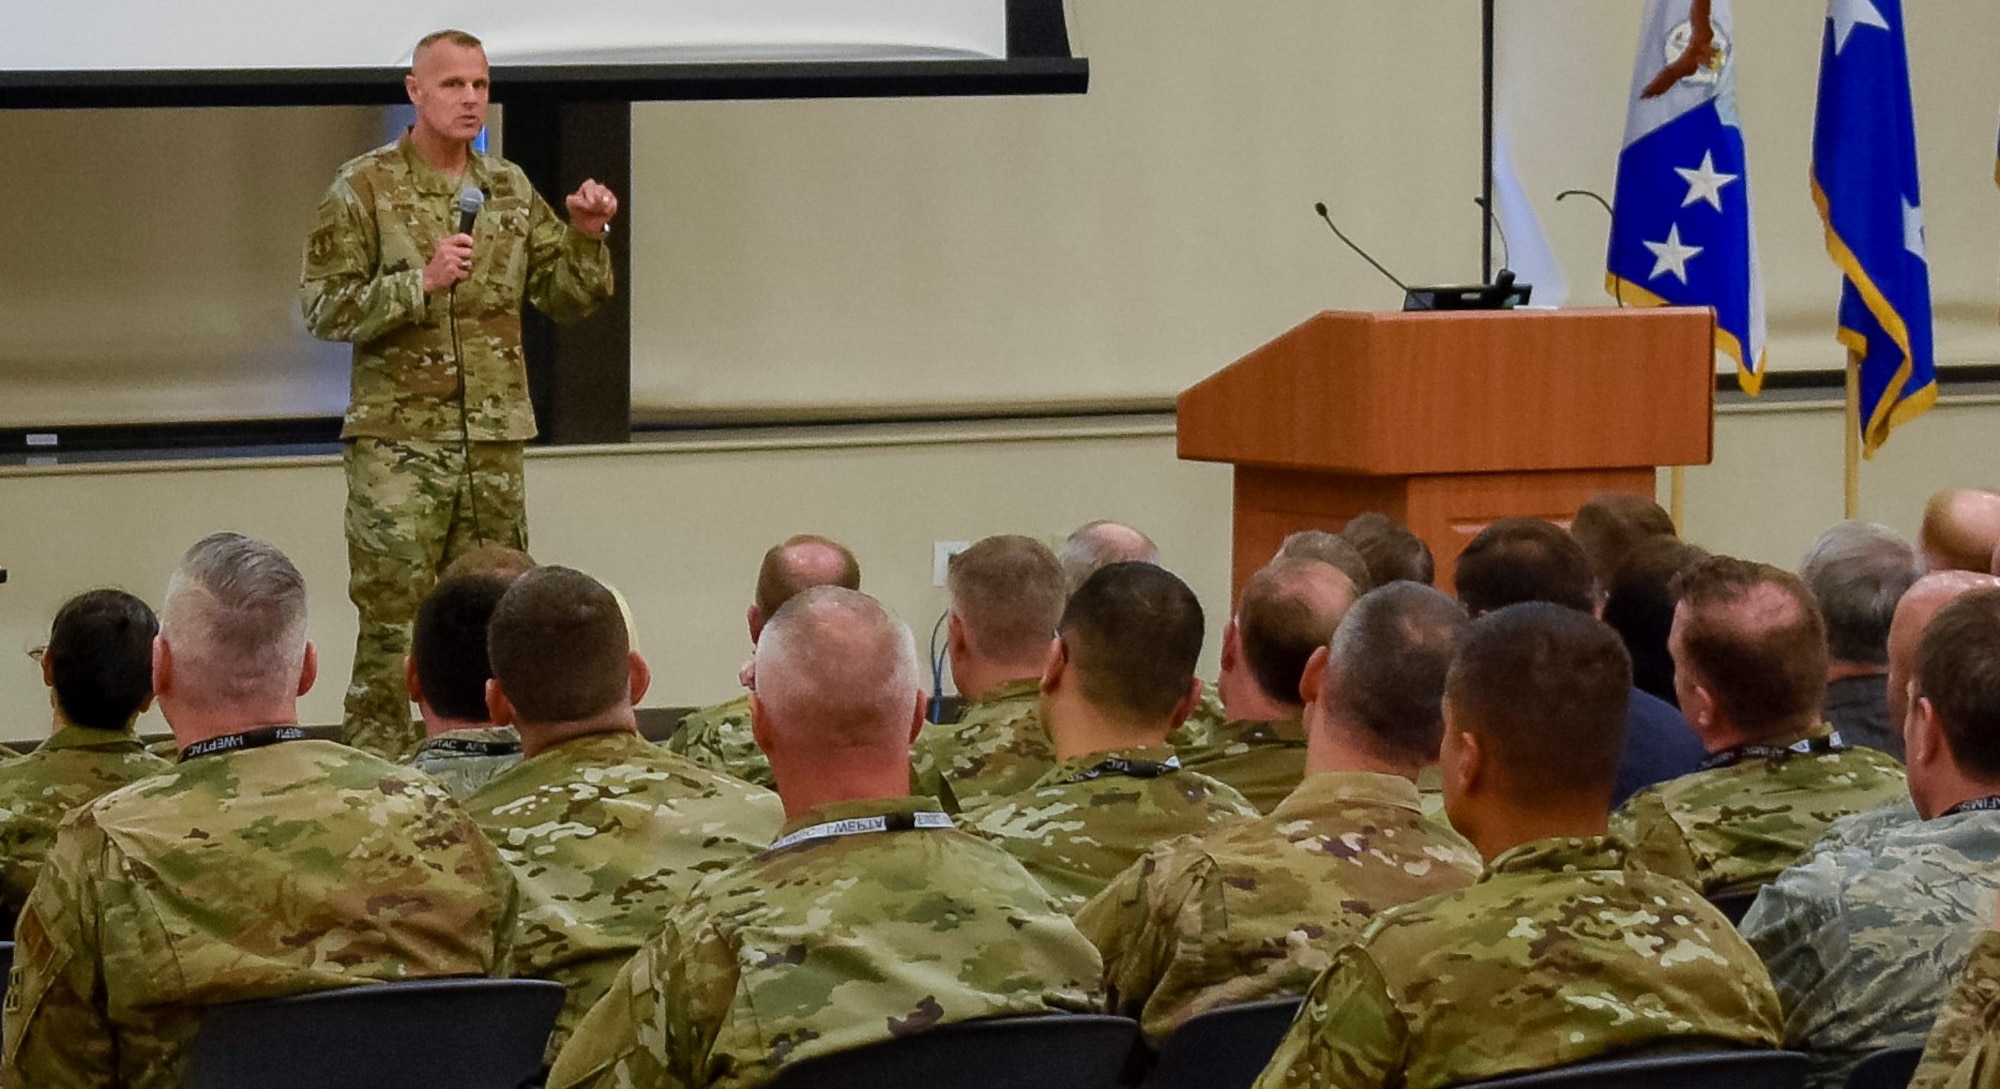 Air Force Installation and Mission Support Center commander, Maj. Gen. Brad Spacy, addresses attendees at the out brief at this year's Installation and Mission Support Weapons and Tactics Conference held at Joint Base San Antonio-Lackland, Texas, April 10, 2019. Hosted by the Air Force Installation and Mission Support Center, I-WEPTAC provides the only Air Force innovation forum for the installation and mission support communities. (U.S. Air Force photo by Armando Perez)